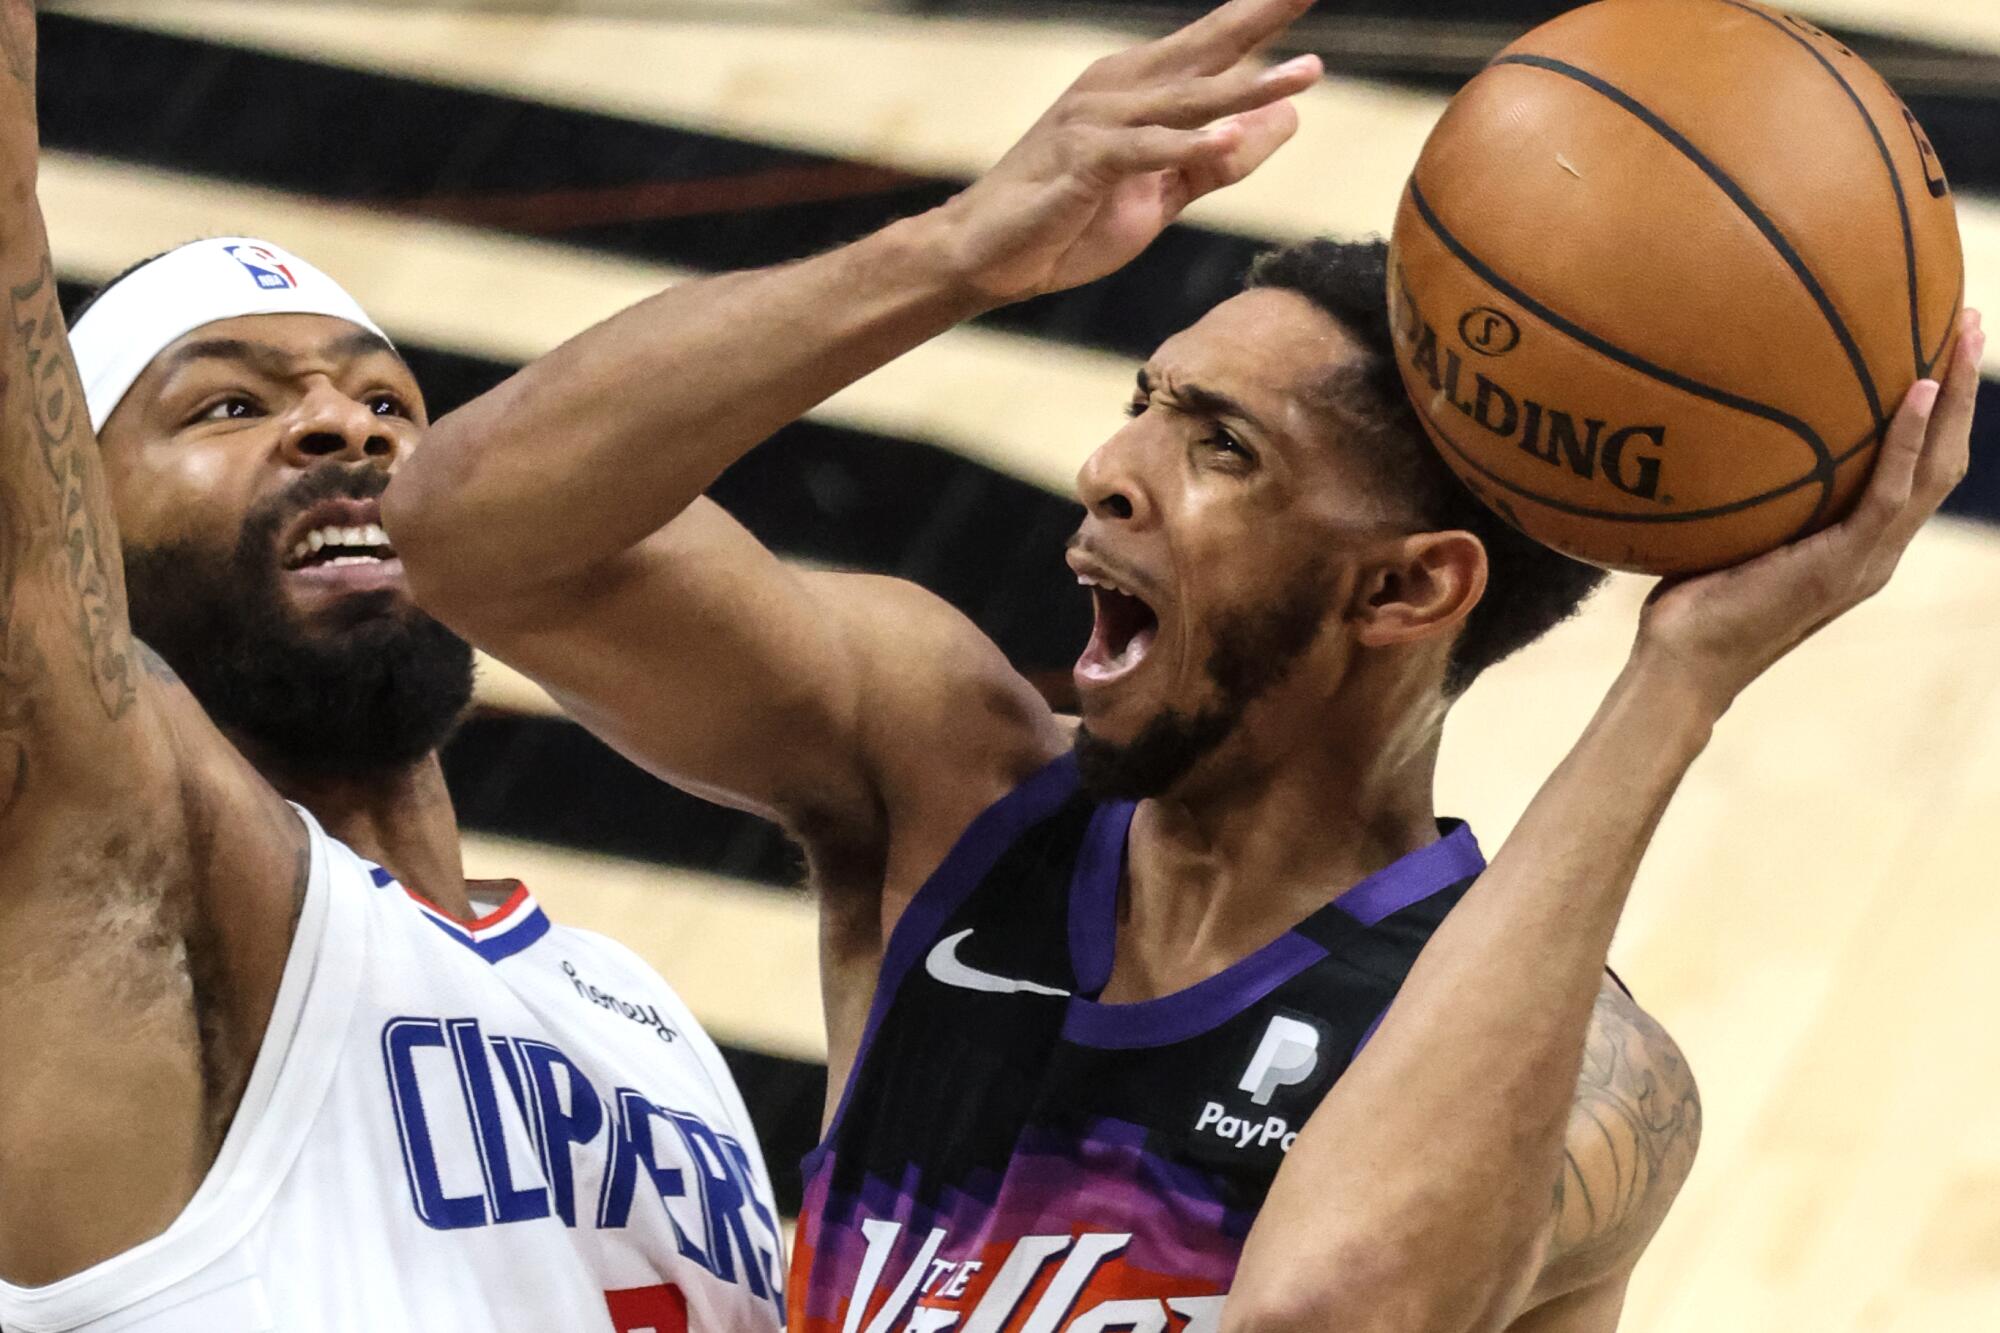 Suns guard Cameron Payne tries to score against Clippers forward Marcus Morris Sr. in Game 2.